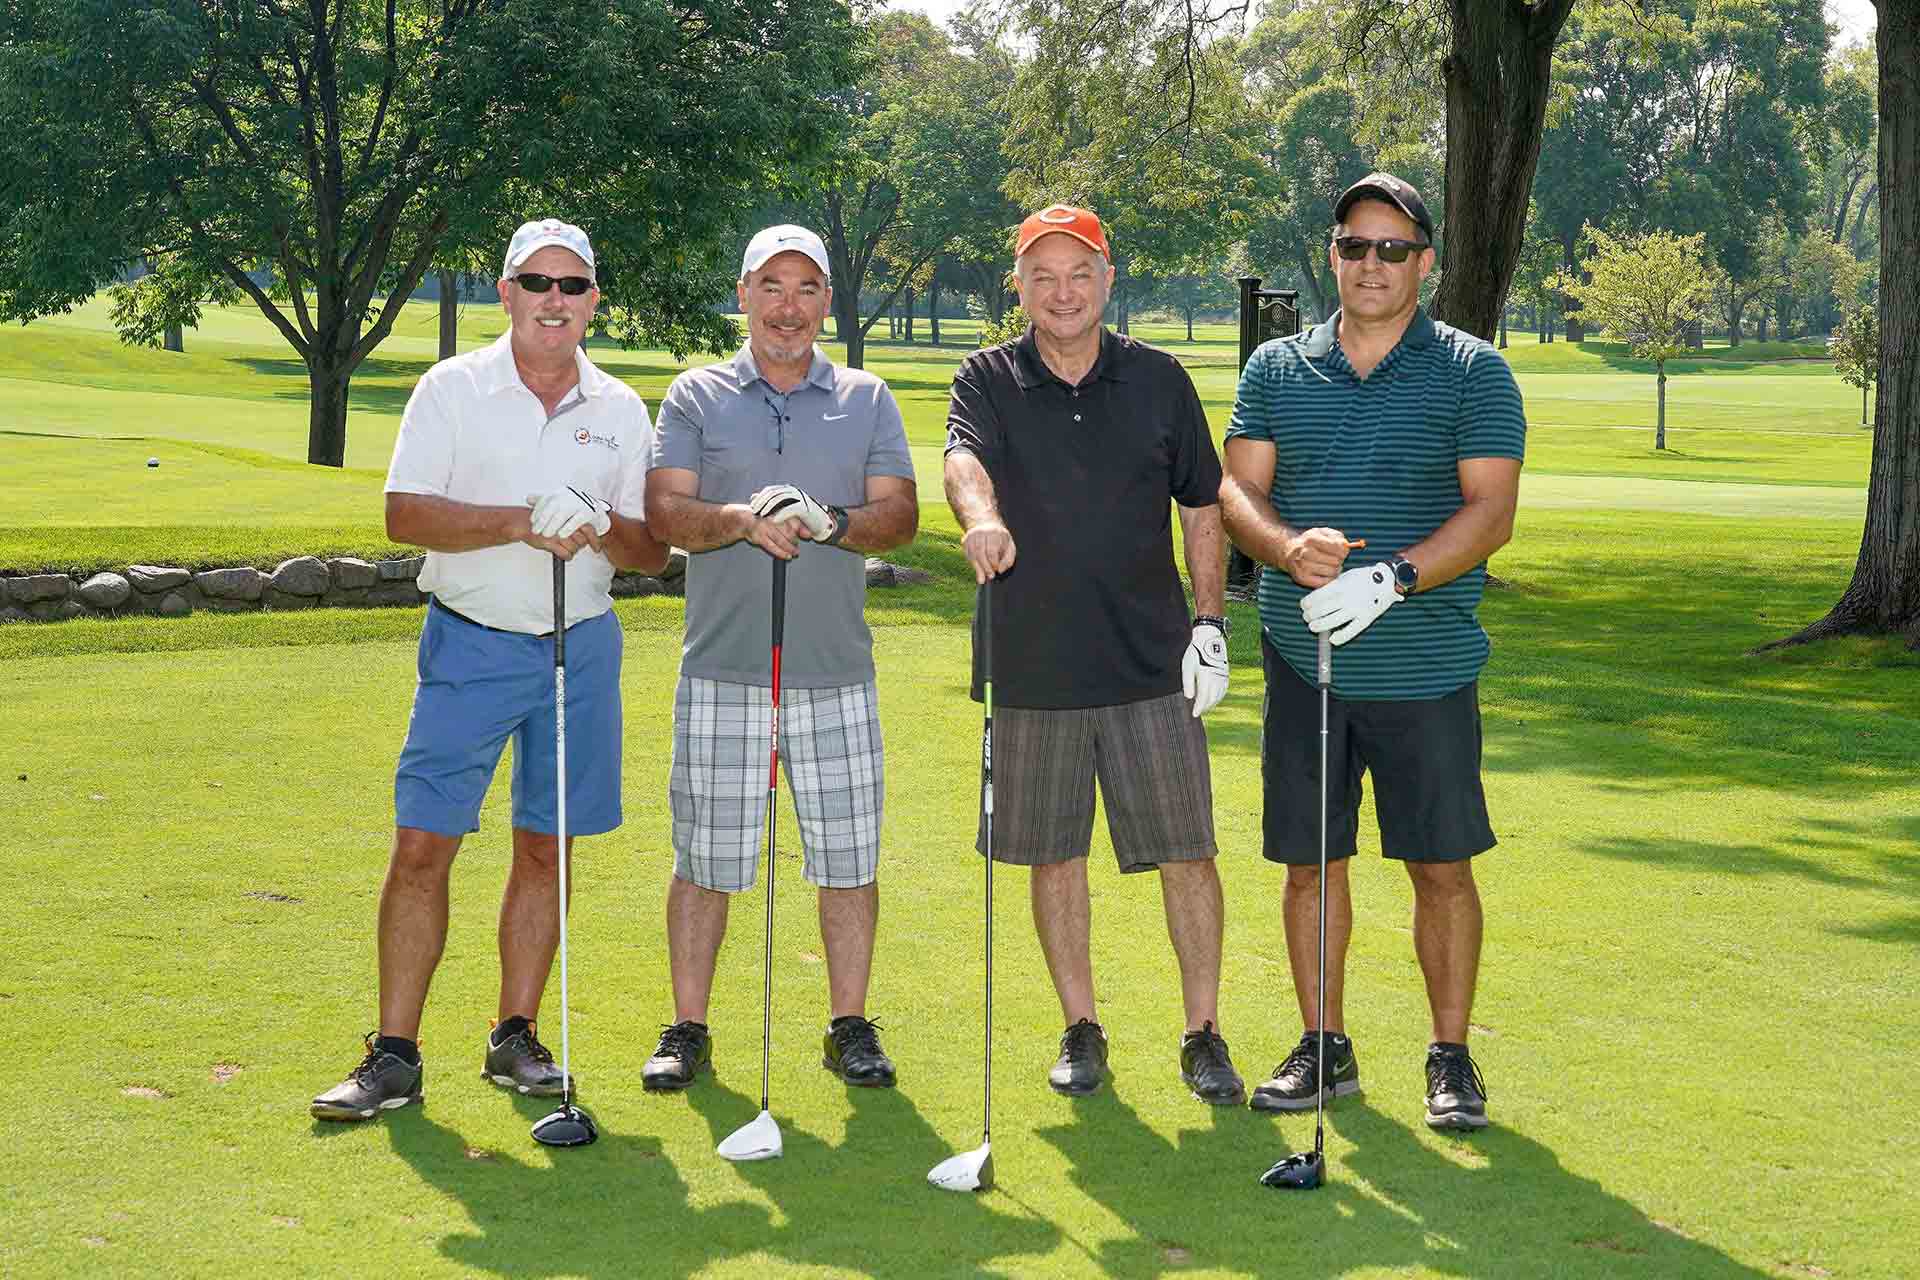 2019-endowment-classic-four-golfers-smiling-on-golf-course